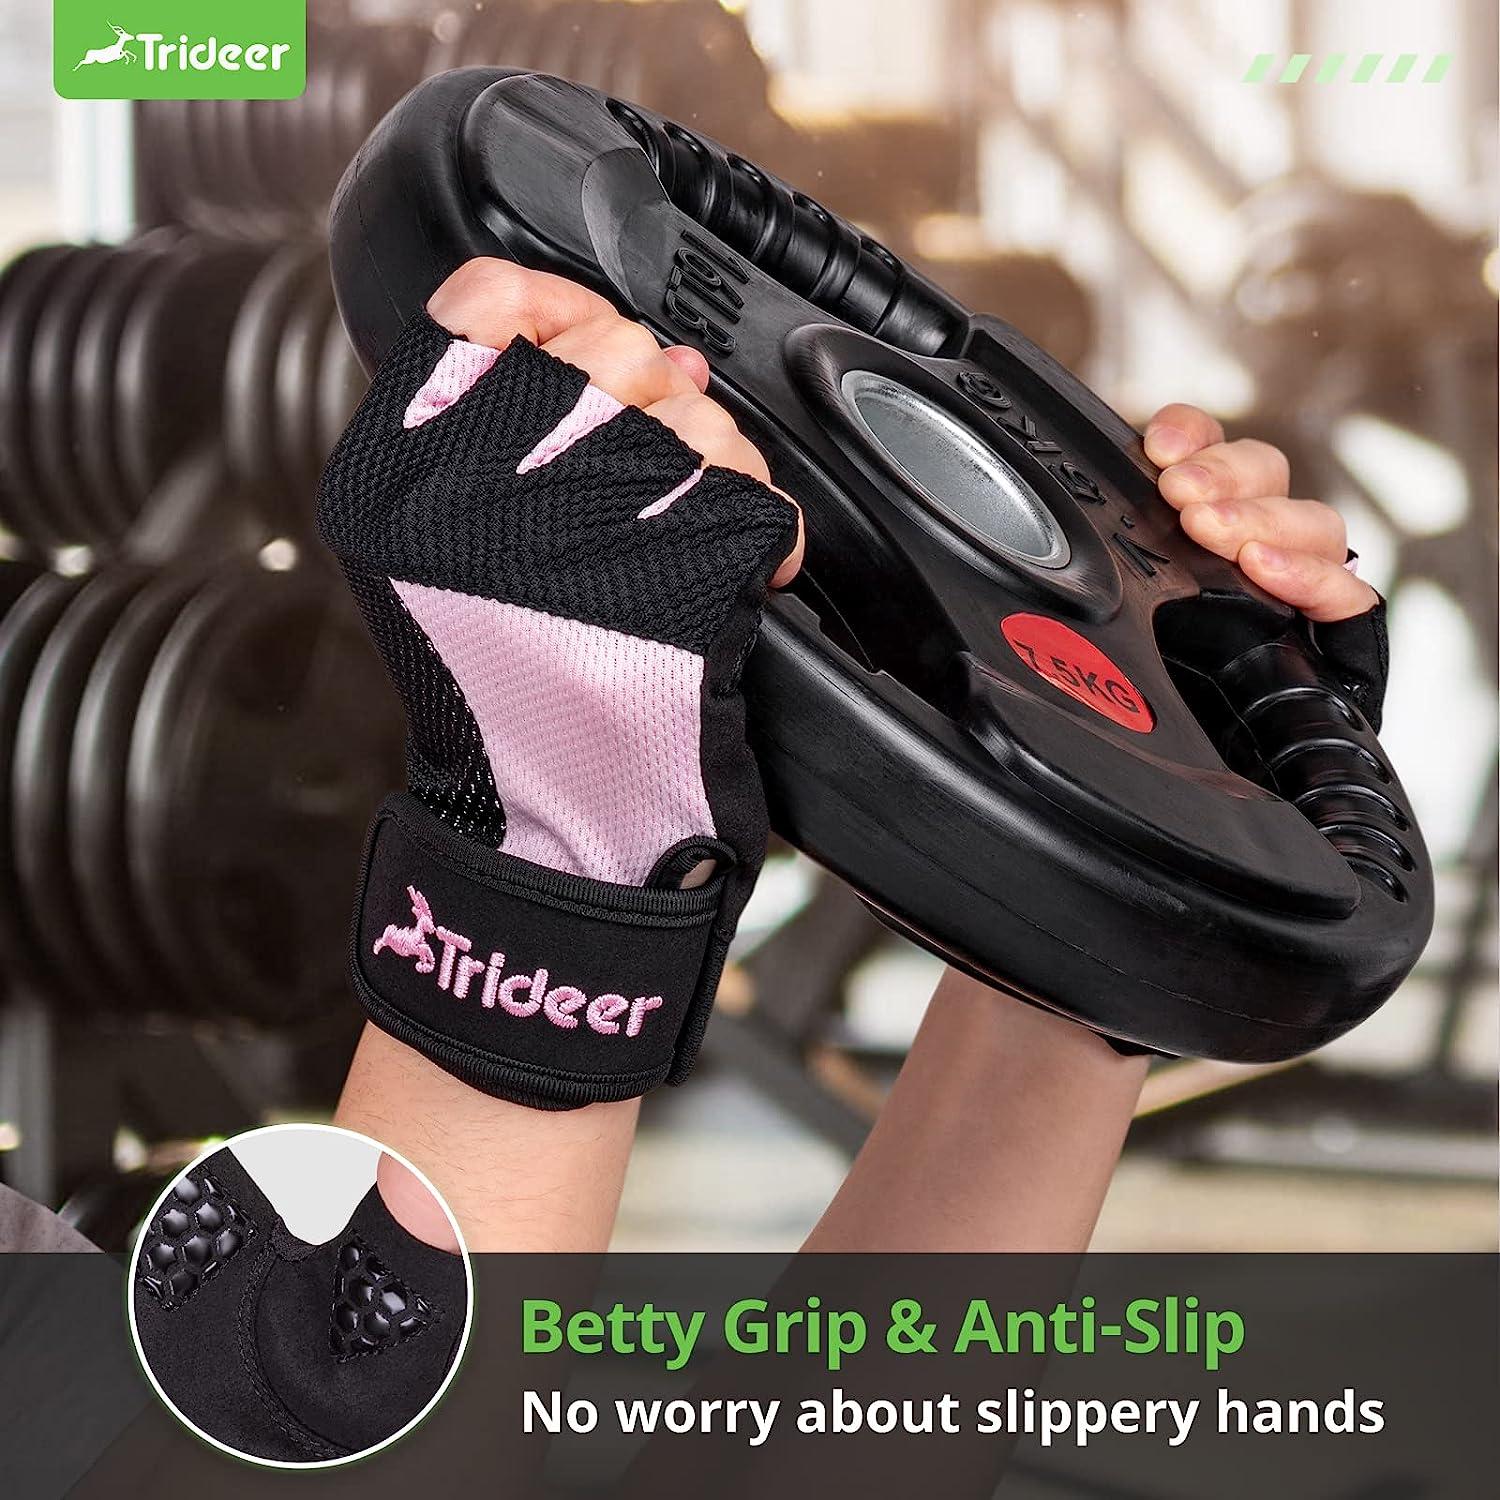 Trideer Breathable Workout Gloves Women with Grip, Weight Lifting Gloves  Gym Gloves for Weightlifting, Exercise, Training, Rowing and Biking Pink  Small (6.3-7.1 in)